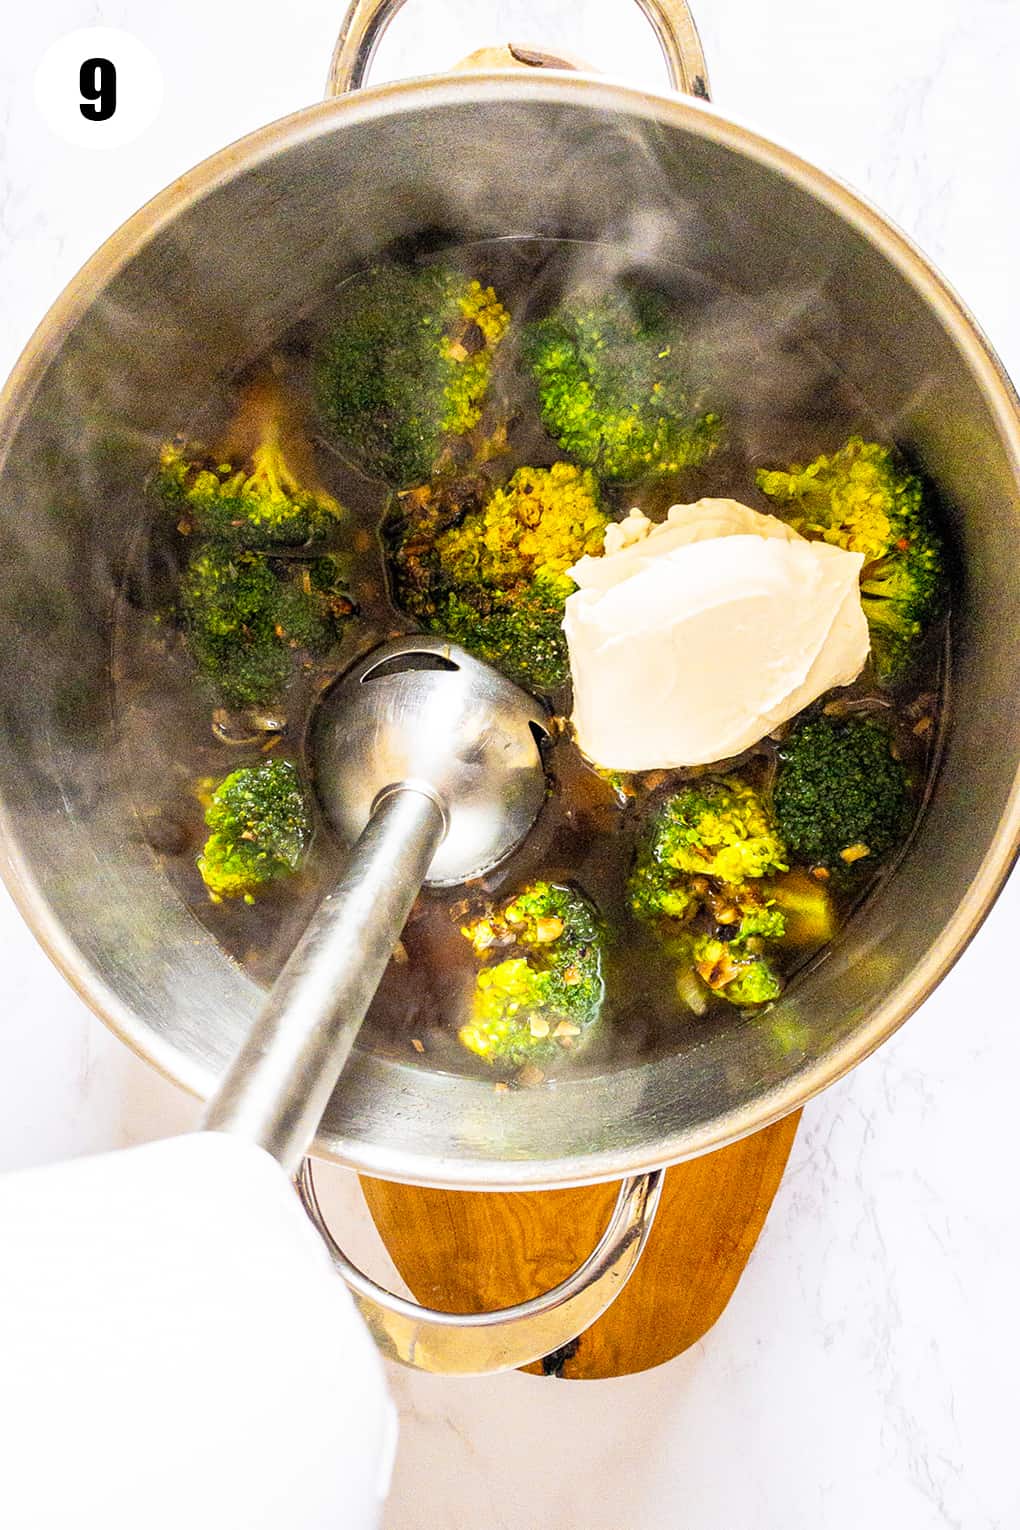 cooked broccoli florets in a pot with an immersion blender